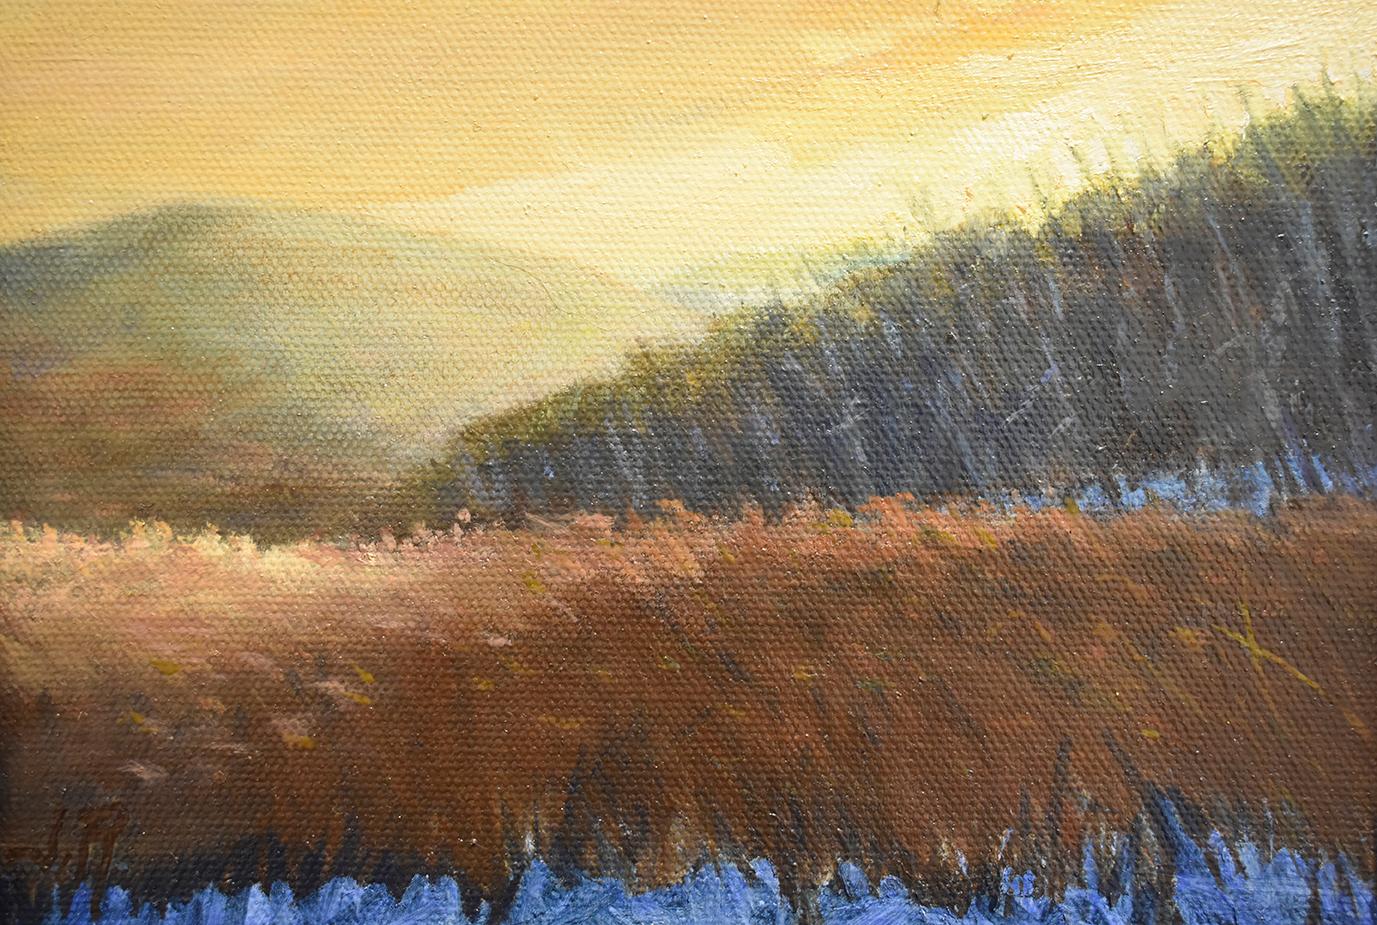 Resting Field in Winter (En Plein Air Landscape Painting on Canvas of a Sunset)  2